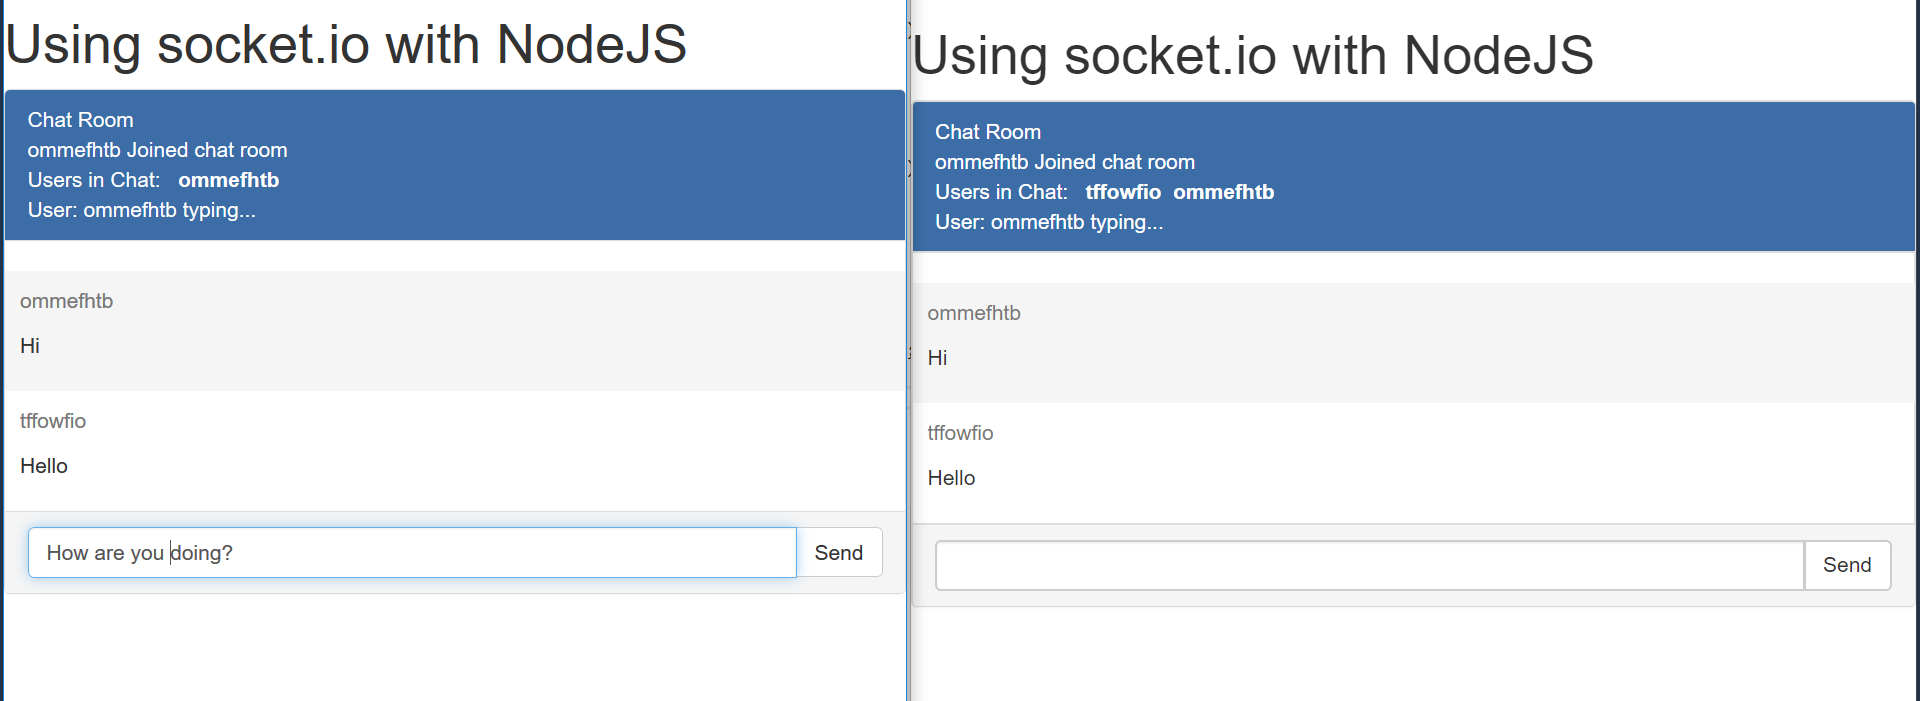 using socketio with nodejs - users chatting